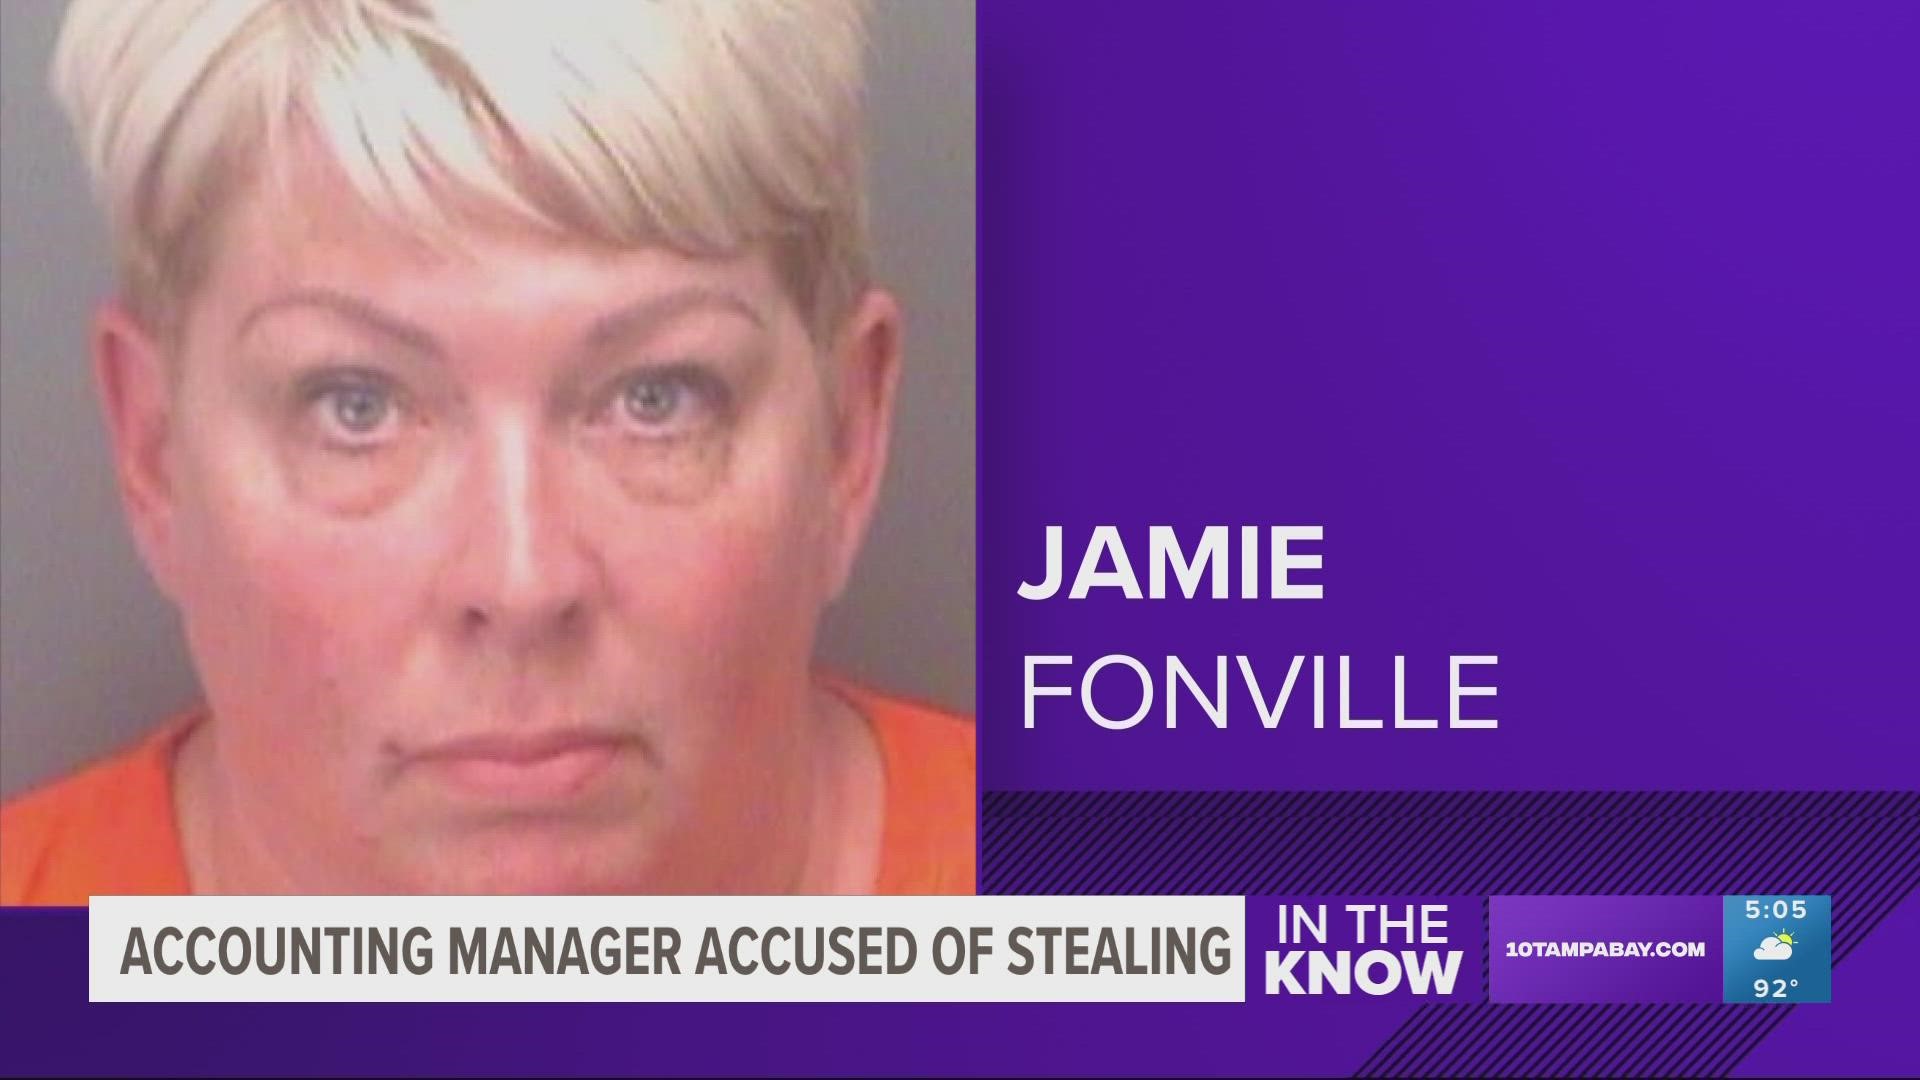 Jamie Fonville also used the money she stole to cover personal credit cards, according to the Pinellas County Sheriff's Office.